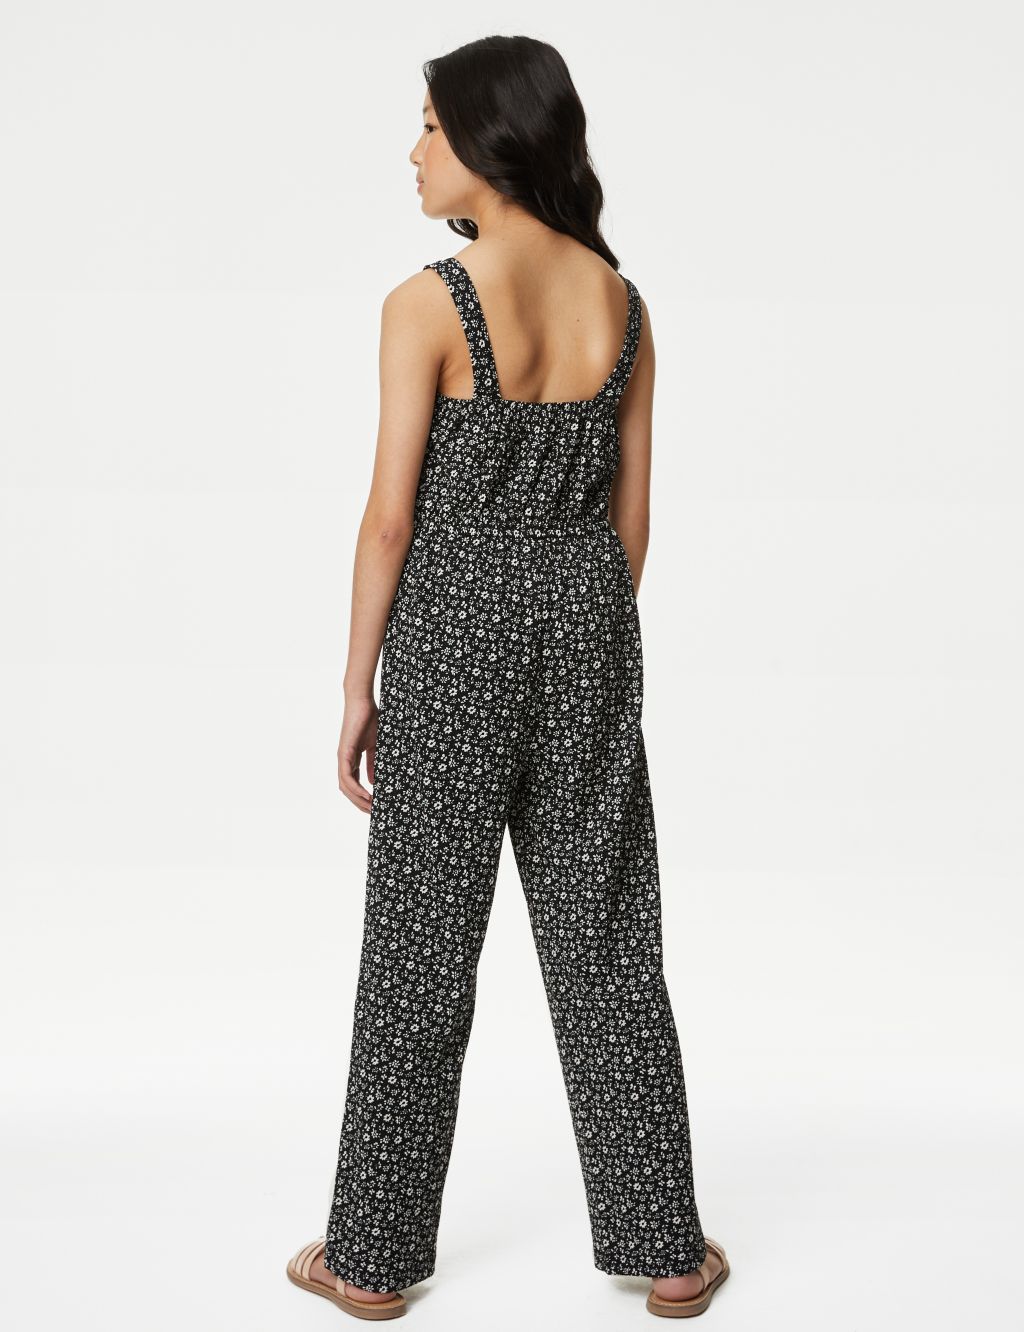 Printed Ditsy Floral Jumpsuit (6-16 Yrs) image 4